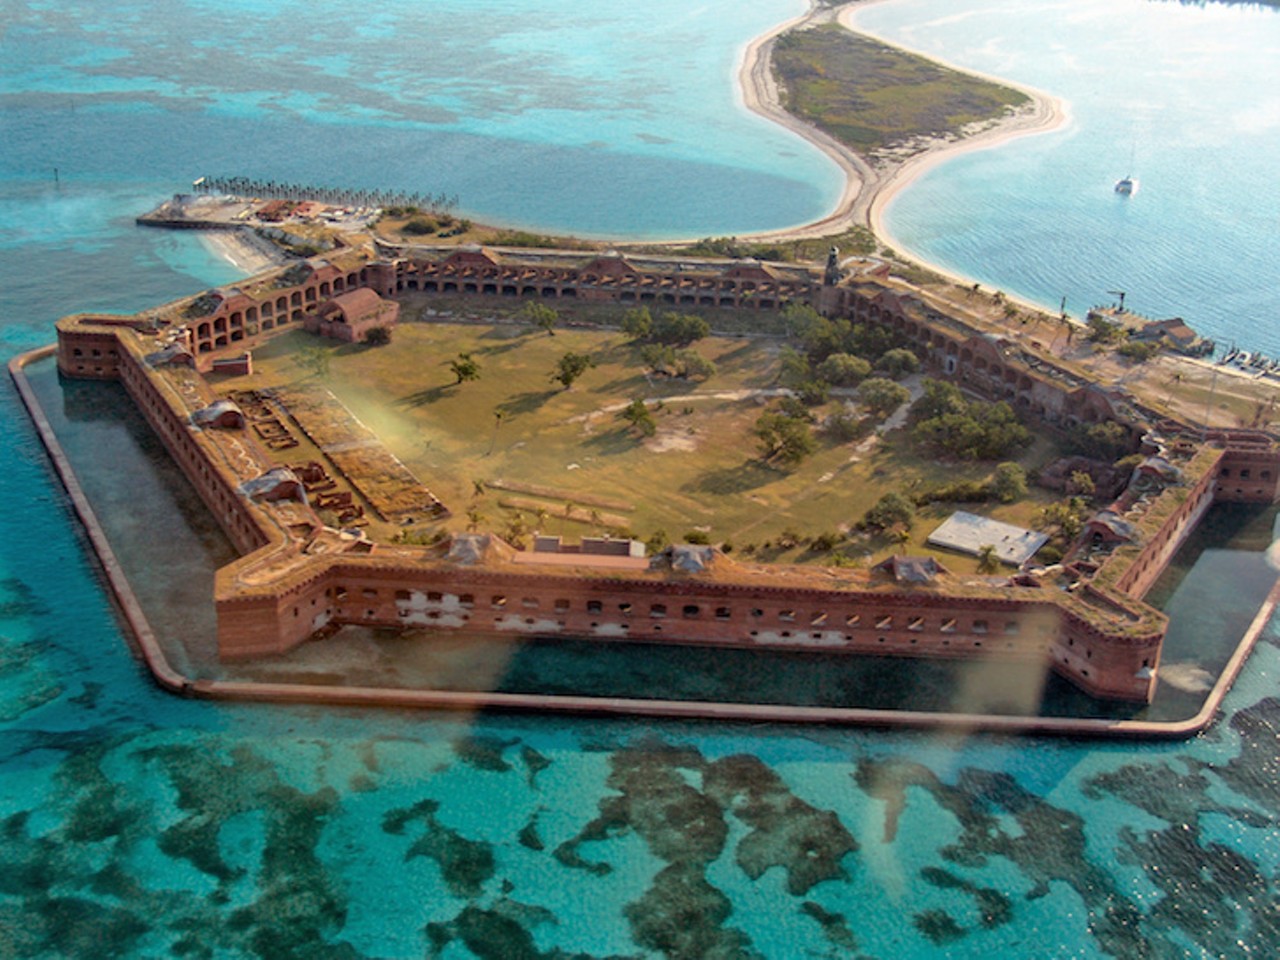 Dry Tortugas National Park
Key West, FL | 866-758-6420
Instagram shots of your camping weekend from this site will make all your friends jelly: How many people can say they&#146;ve slept just feet away from an actual masonry fort from the 1800s? Spots are limited though, so make sure you book this trip well in advance. 
Photo Adobe Images